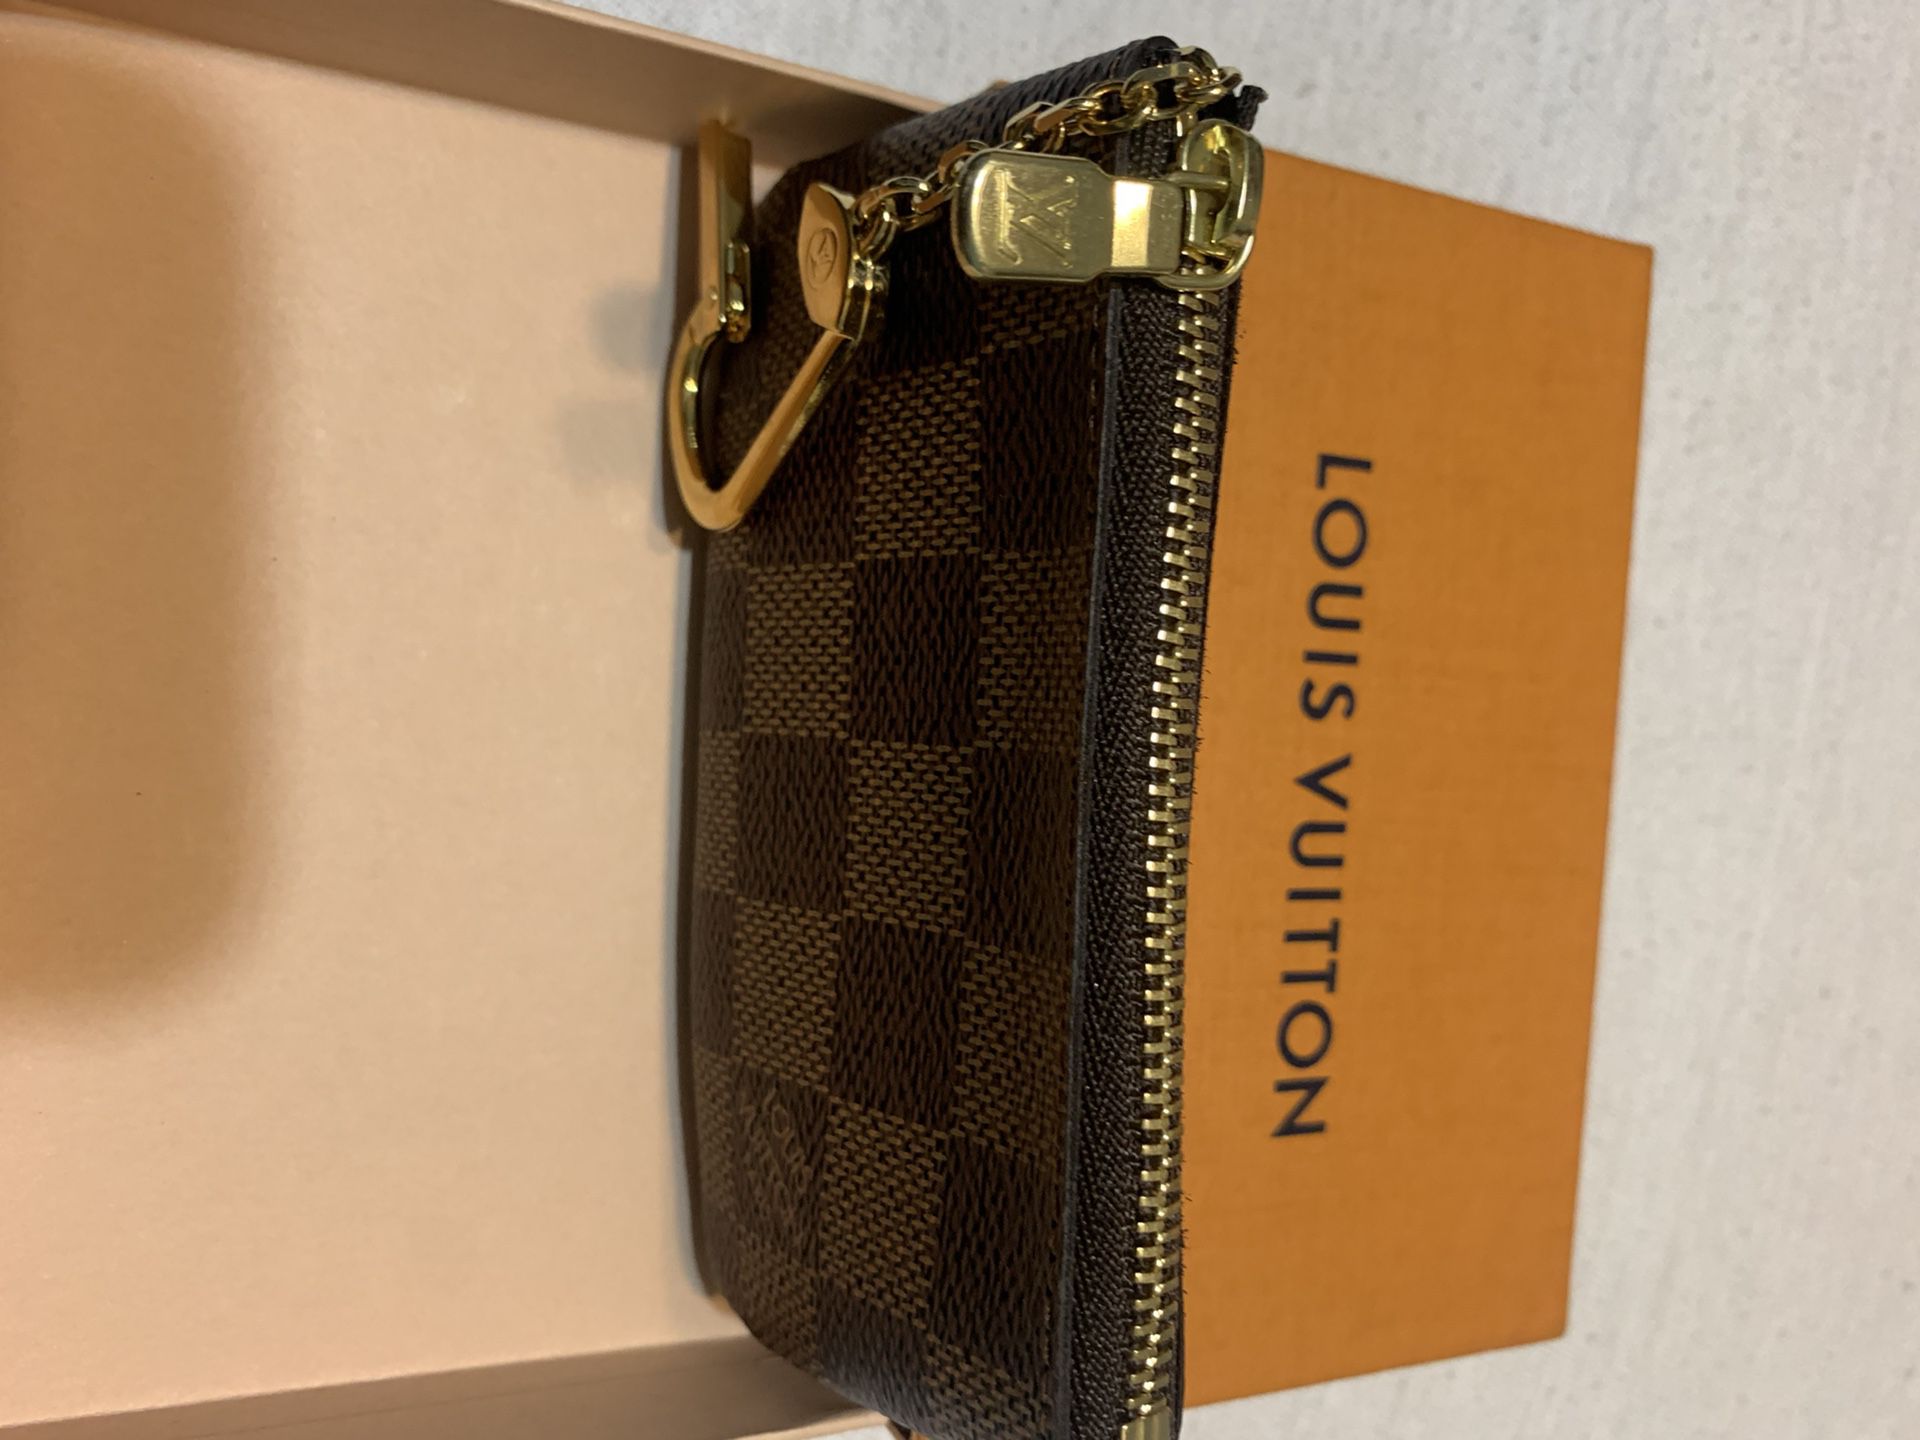 Louis Vuitton Onthego M45372 white bag 35x27x14cm for Sale in Laud By Sea,  FL - OfferUp